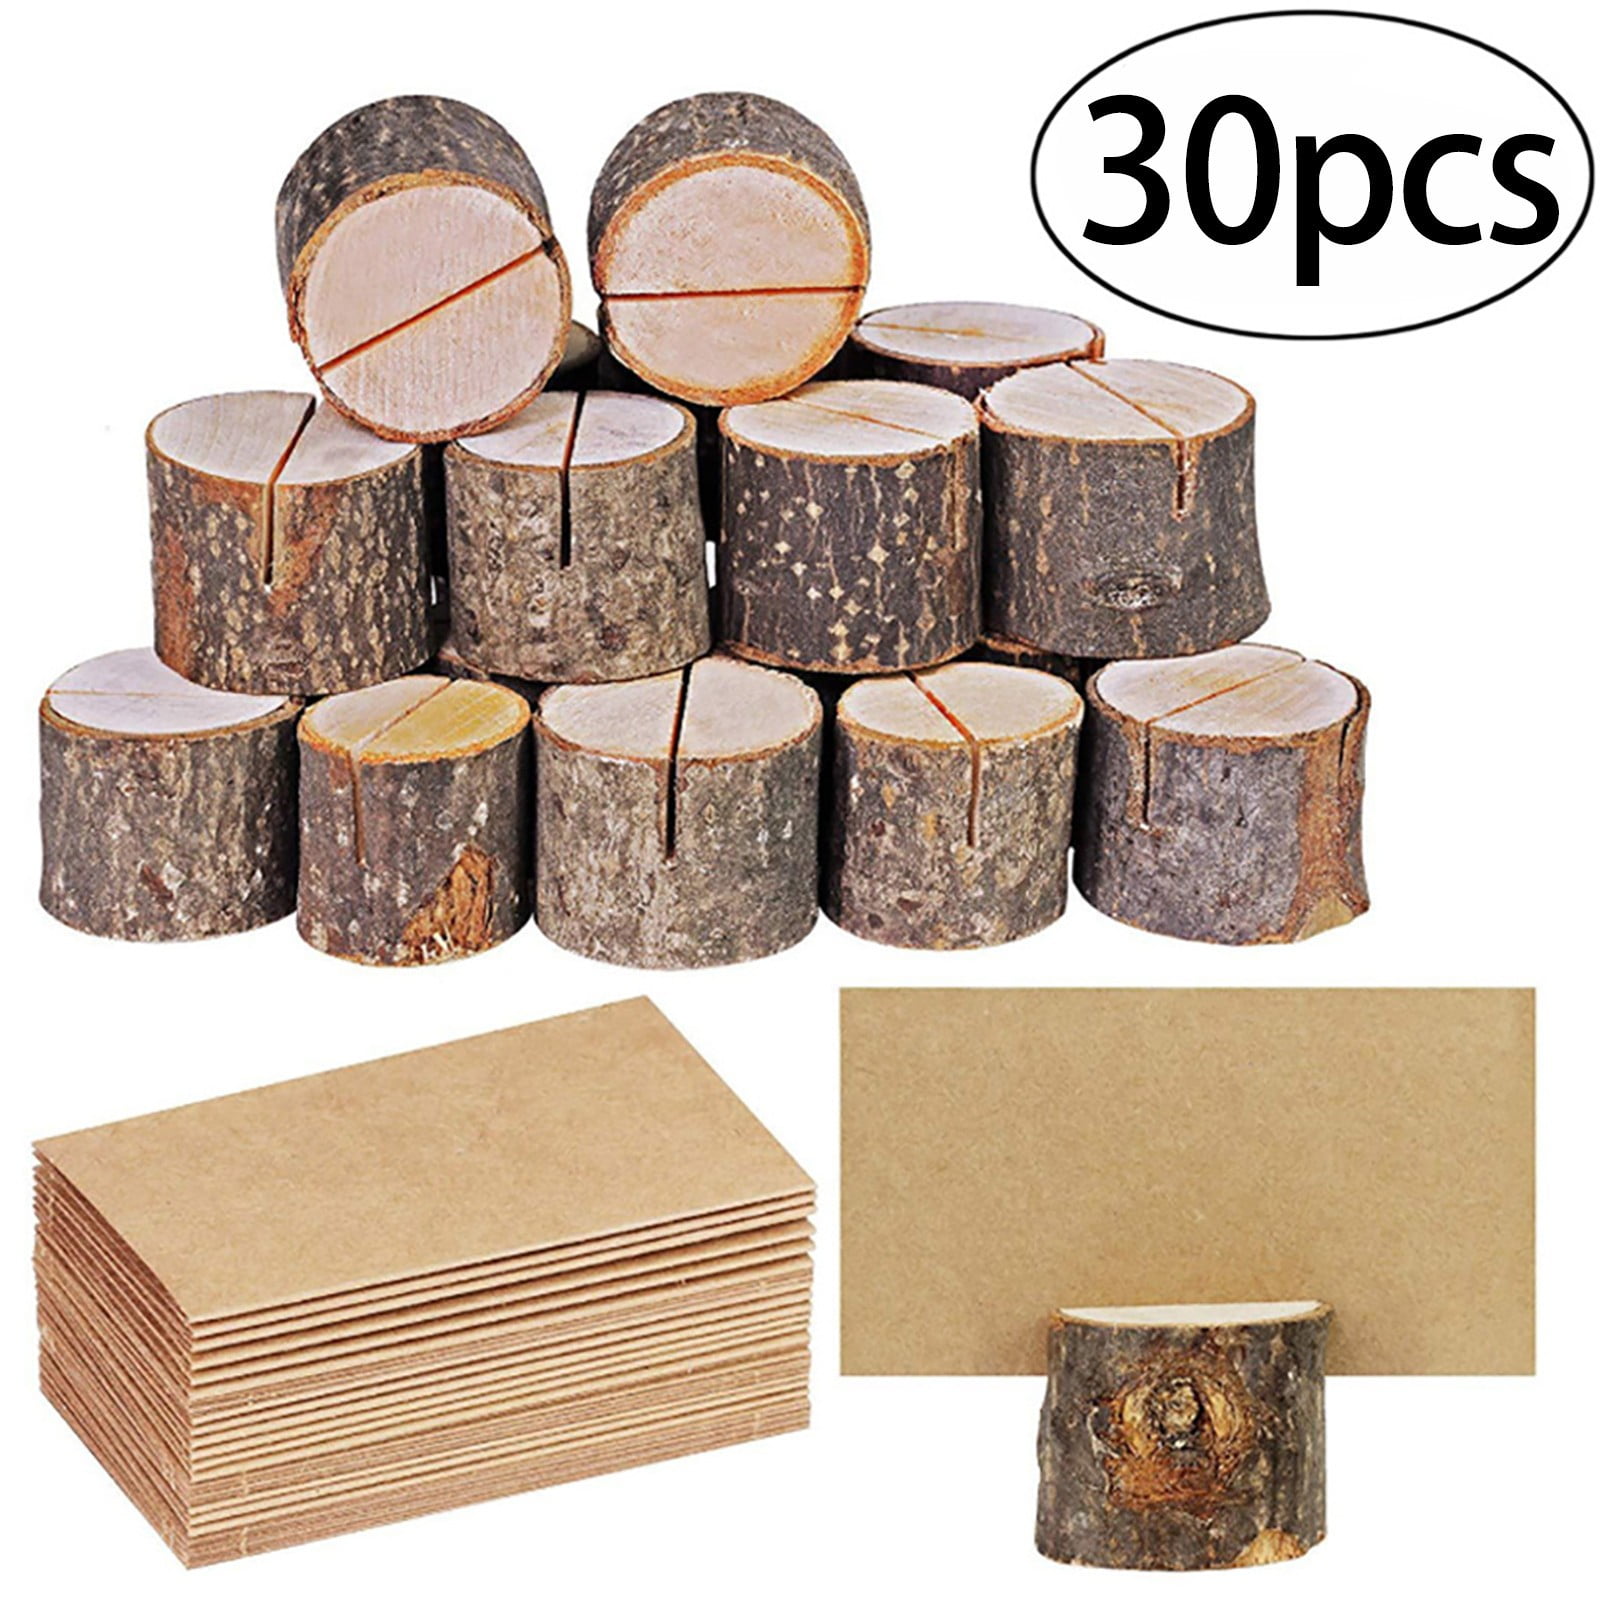 Group 1 20 Pcs Rustic Wood Base Wedding Table Name Sign Number Holder with Kraft Place Cards for Party Decoration Invitation Card Holders Picture Memo Clip Note Photo Clip